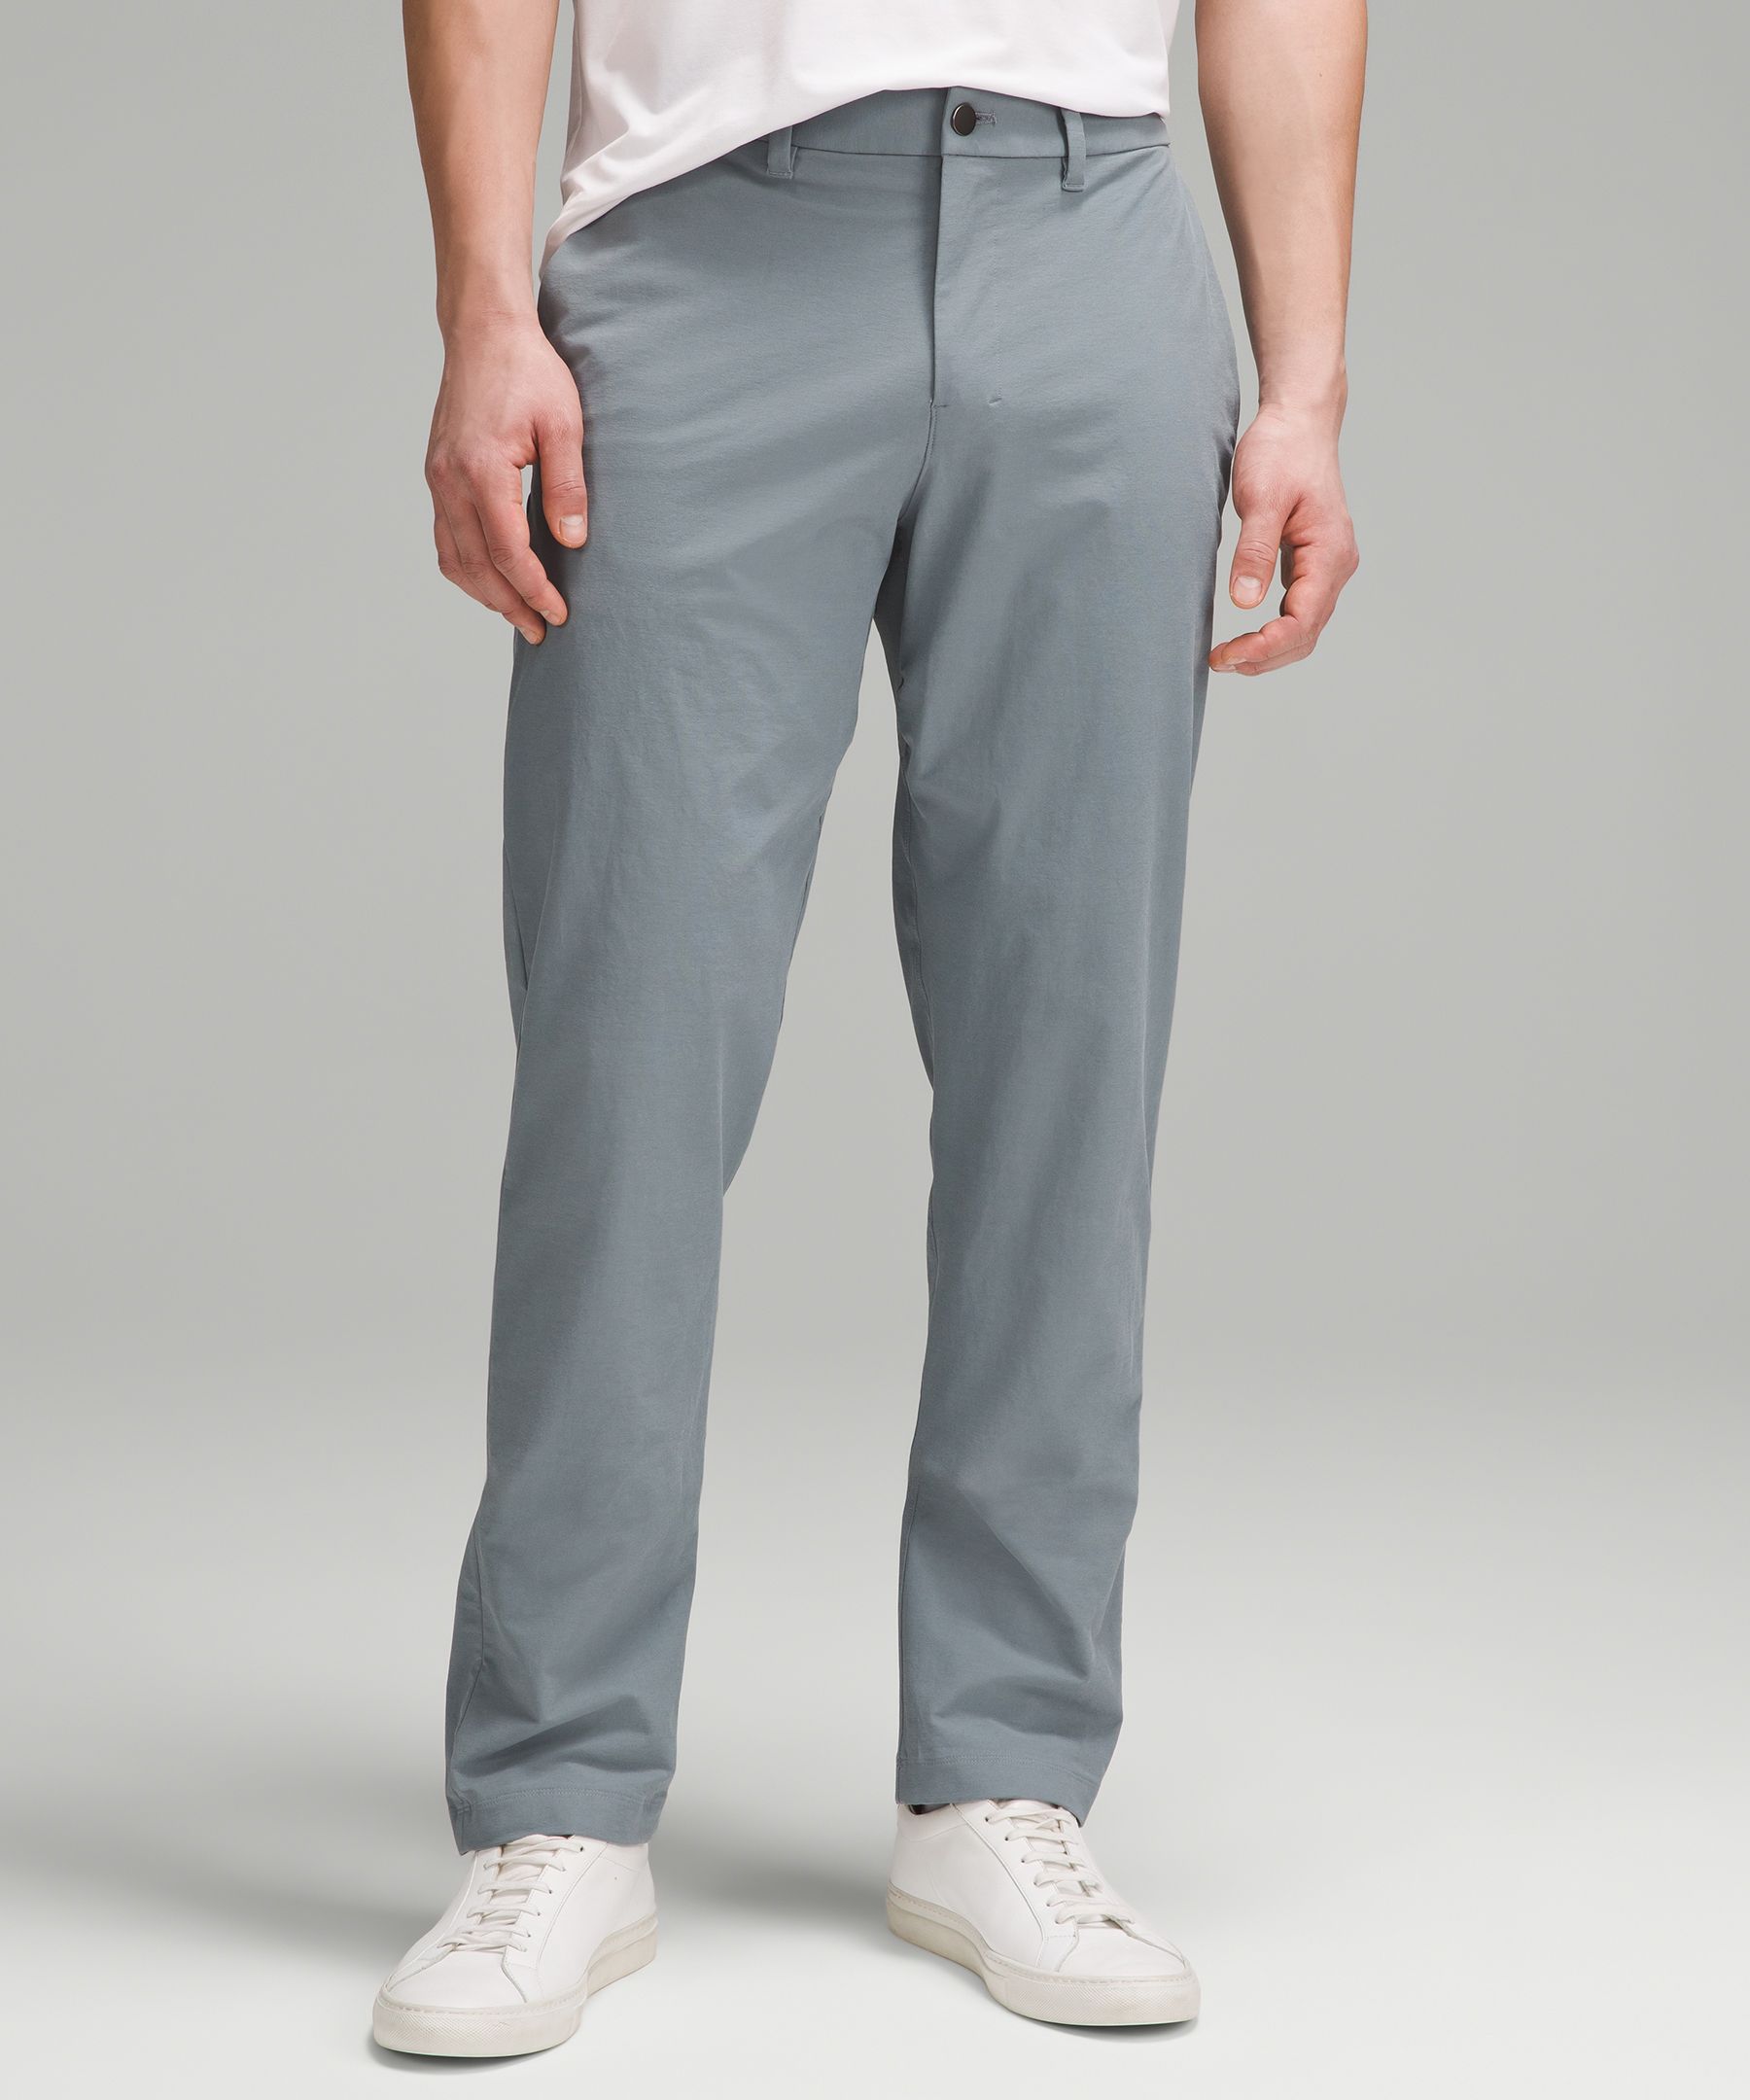 Lululemon Commission Pant Relaxed 34 *Warpstreme - Trench (First Release)  - lulu fanatics